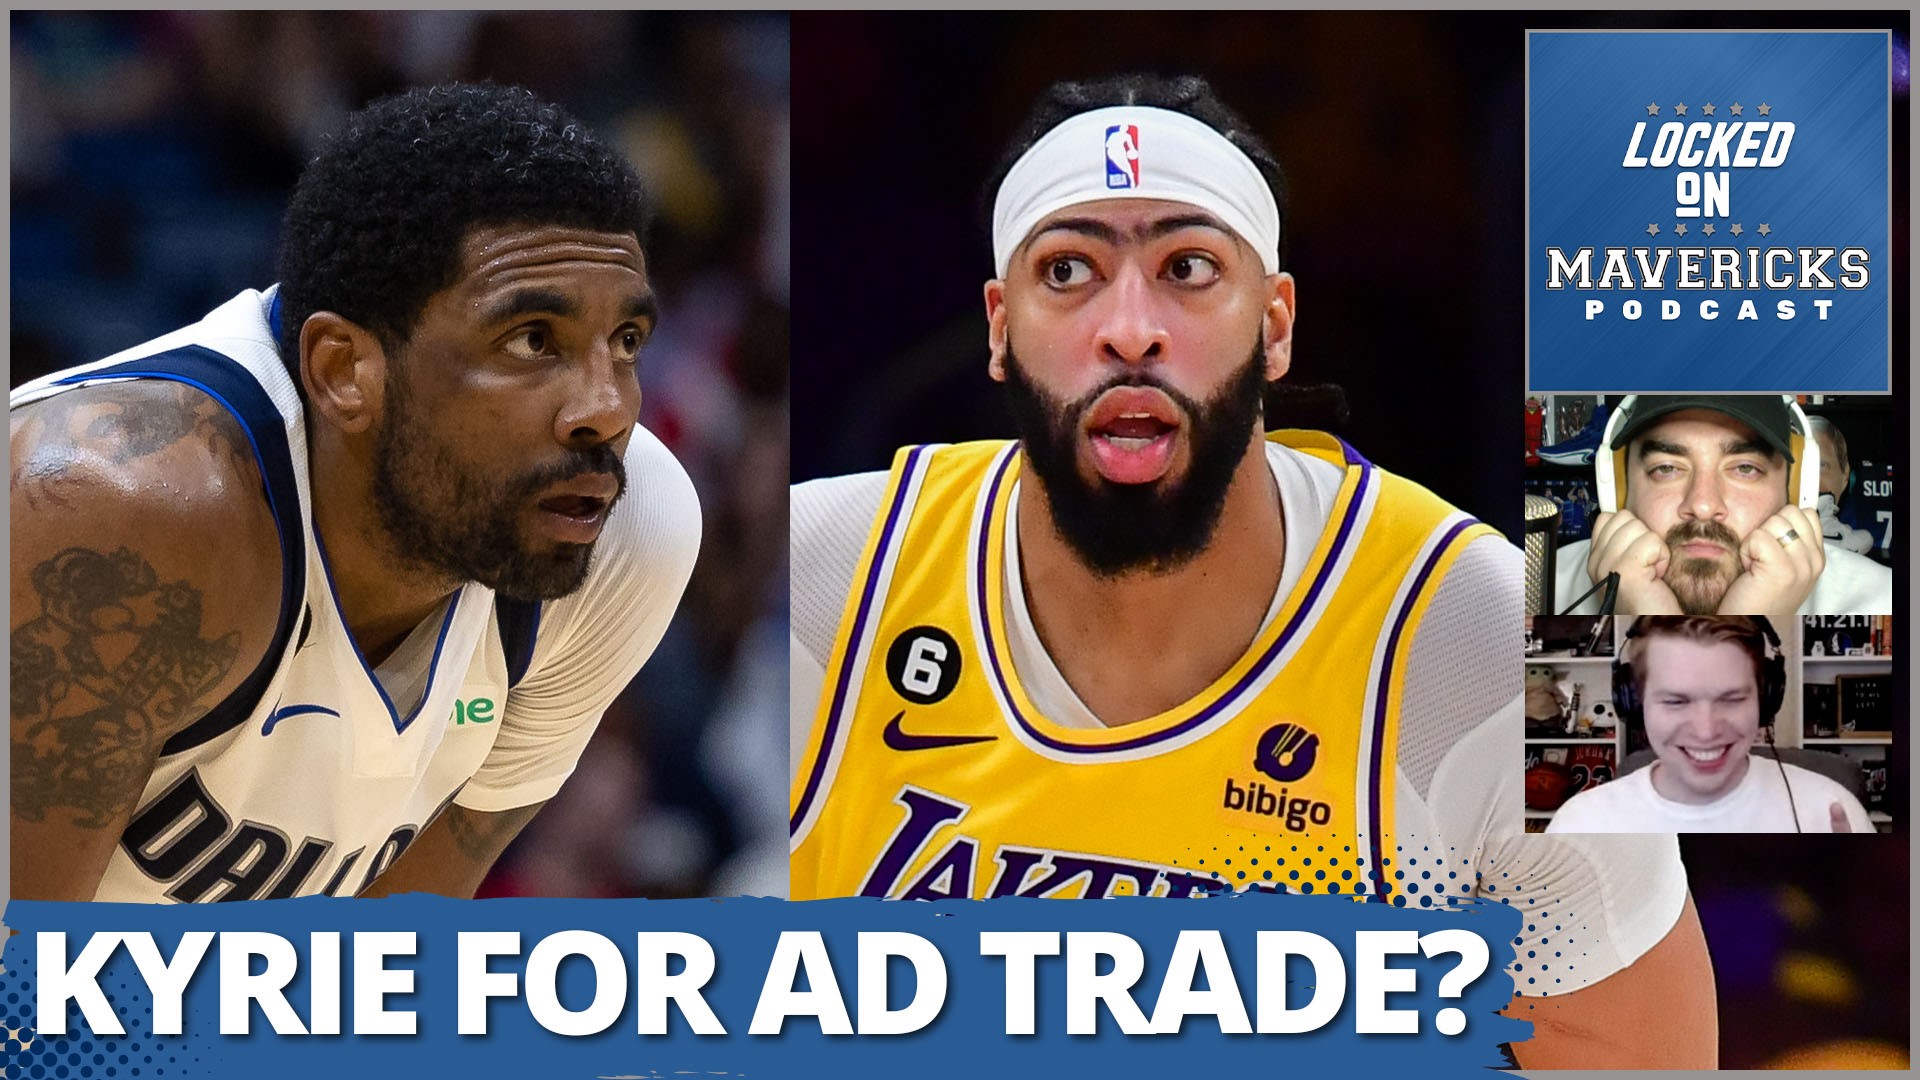 Nick Angstadt & Isaac Harris discuss the possibility of a Los Angeles Lakers and Dallas Mavericks trade swapping Kyrie Irving for Anthony Davis.